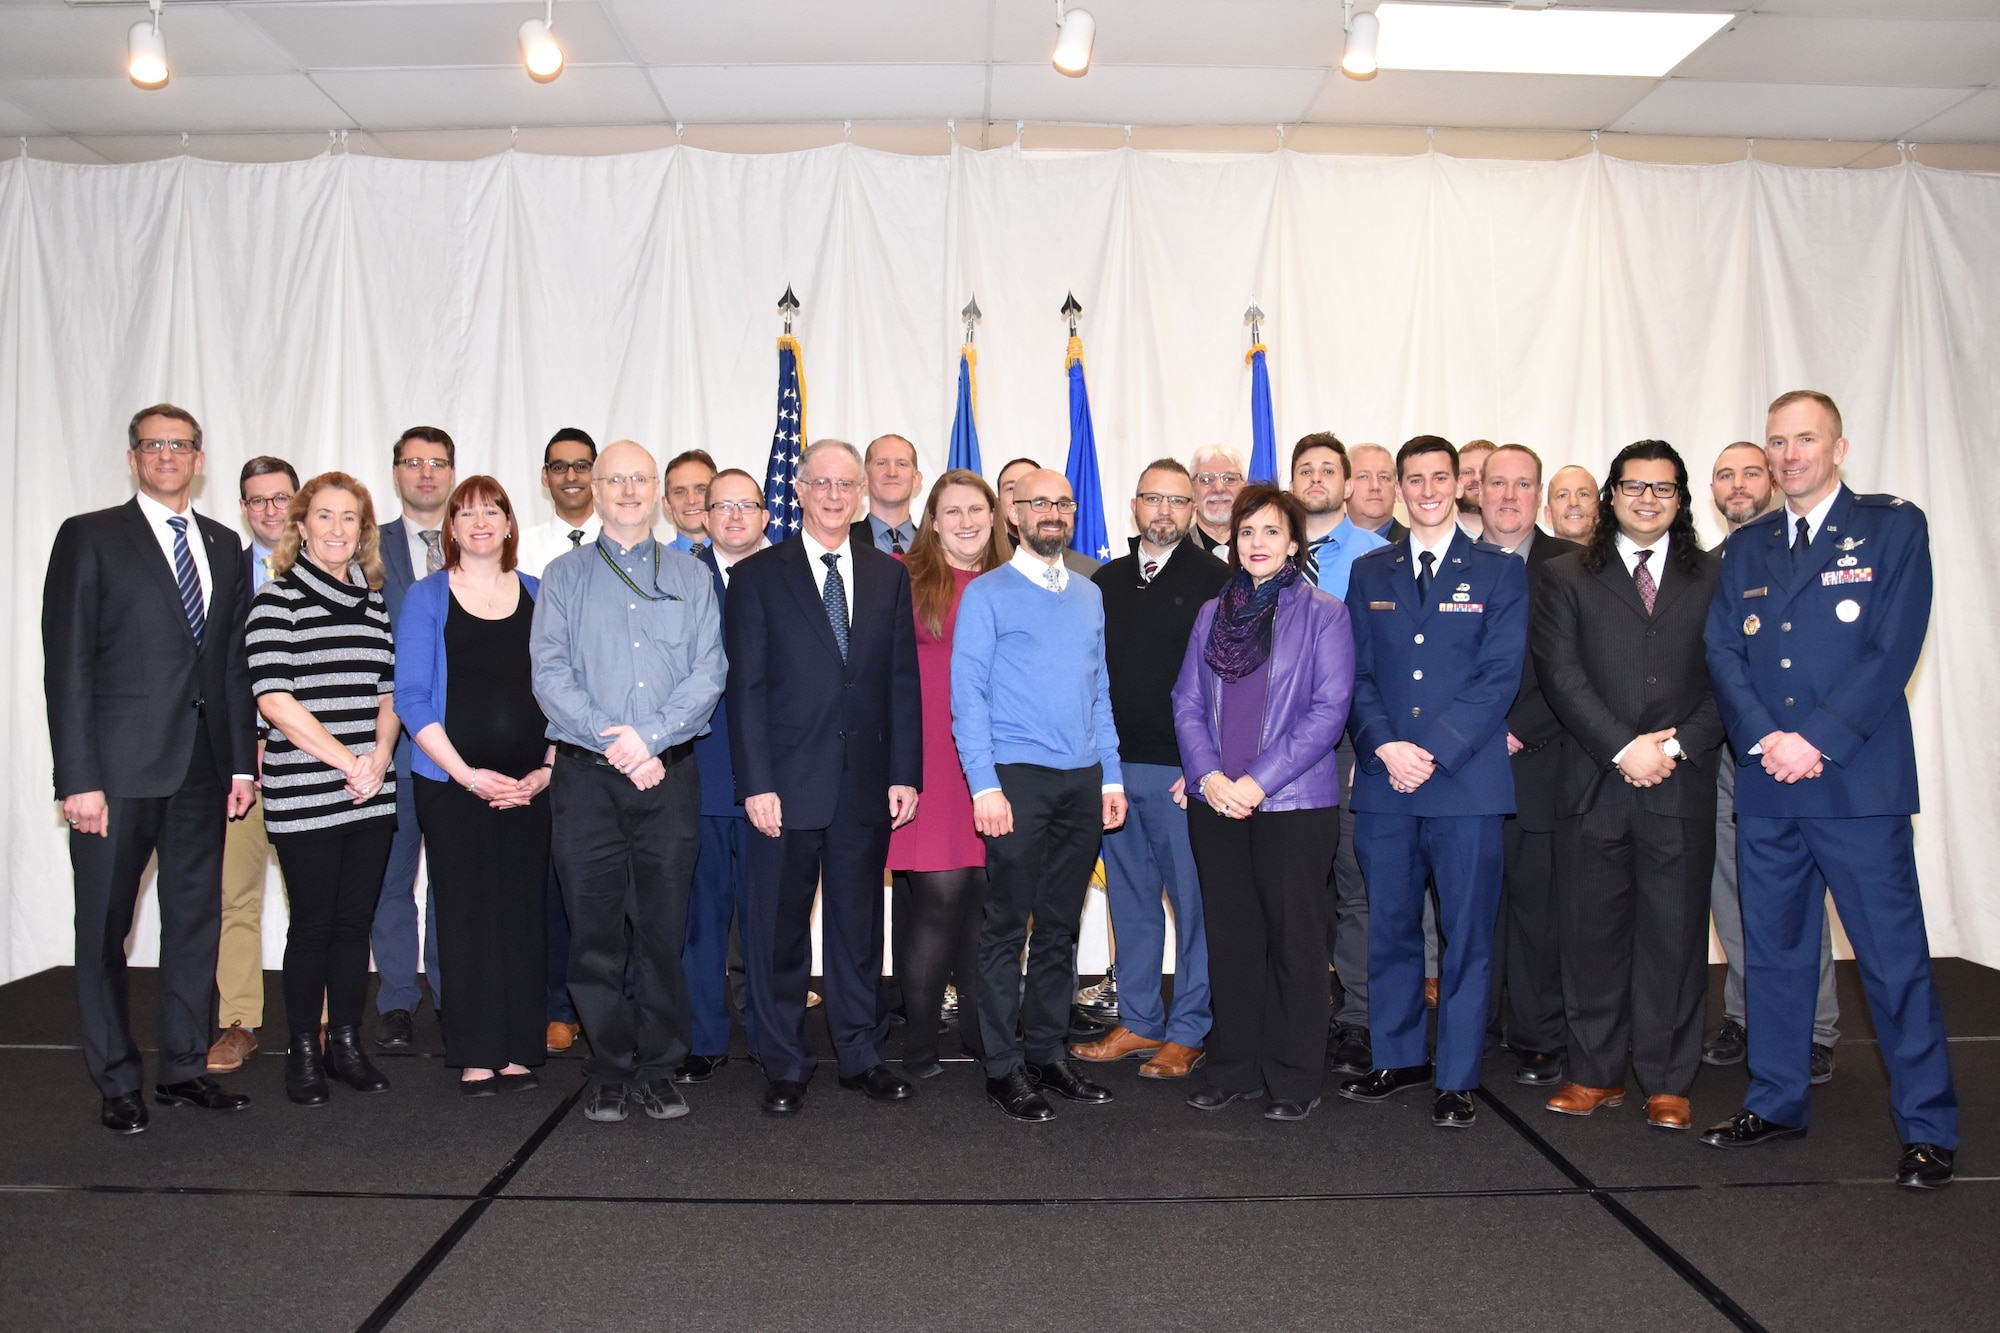 The Air Force Research Laboratory’s Materials and Manufacturing Directorate held their 67th Annual Awards Luncheon at the Hope Hotel and Richard C. Holbrooke Conference Center. Pictured are the award recipients. (U.S. Air Force photo/Spencer Deer)